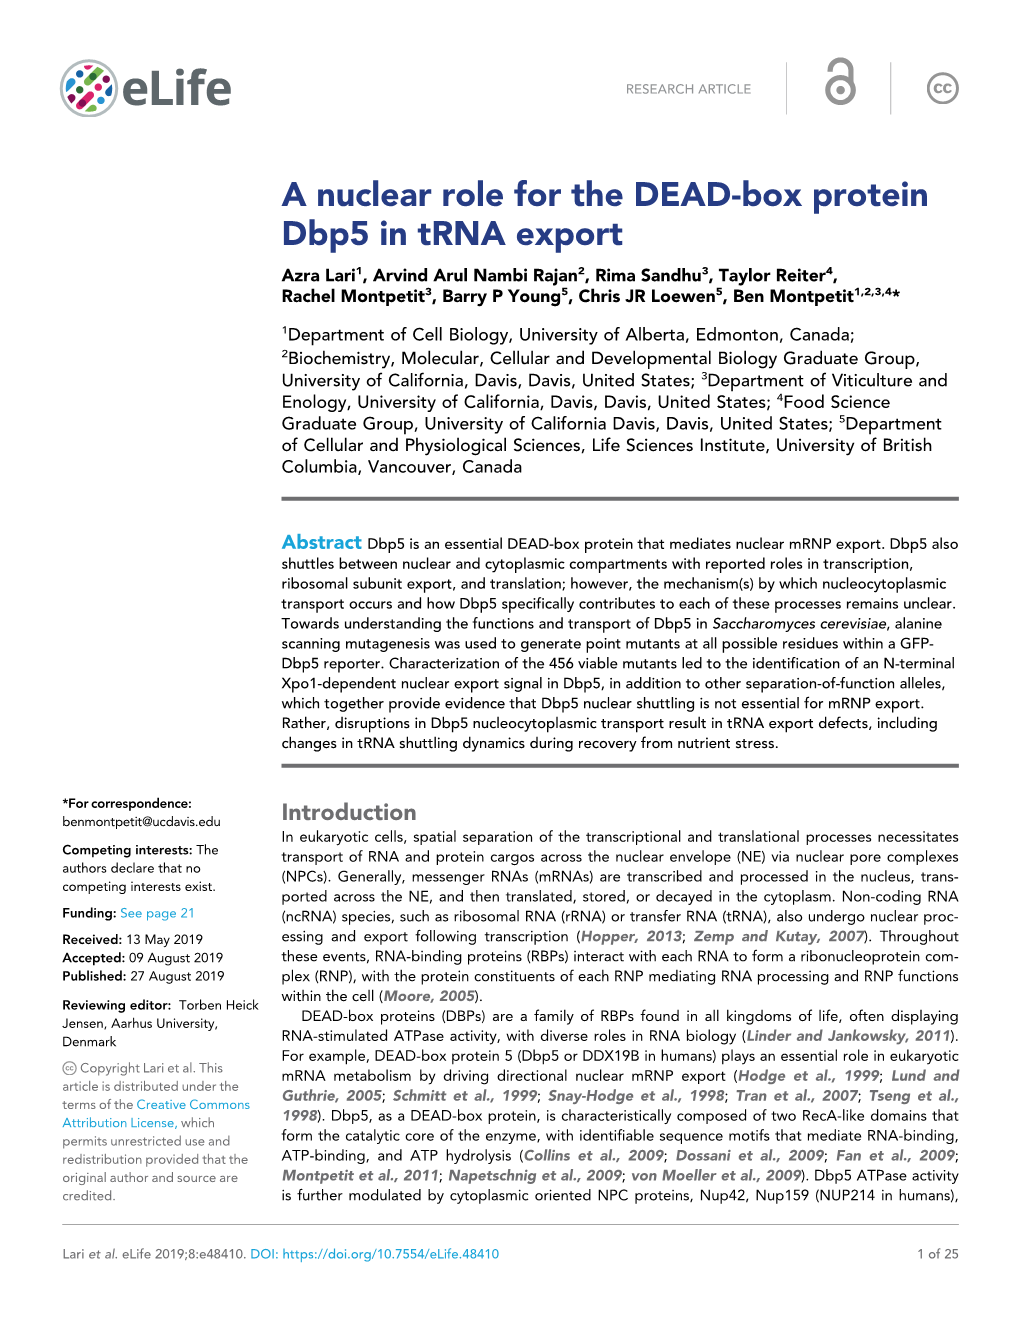 A Nuclear Role for the DEAD-Box Protein Dbp5 in Trna Export